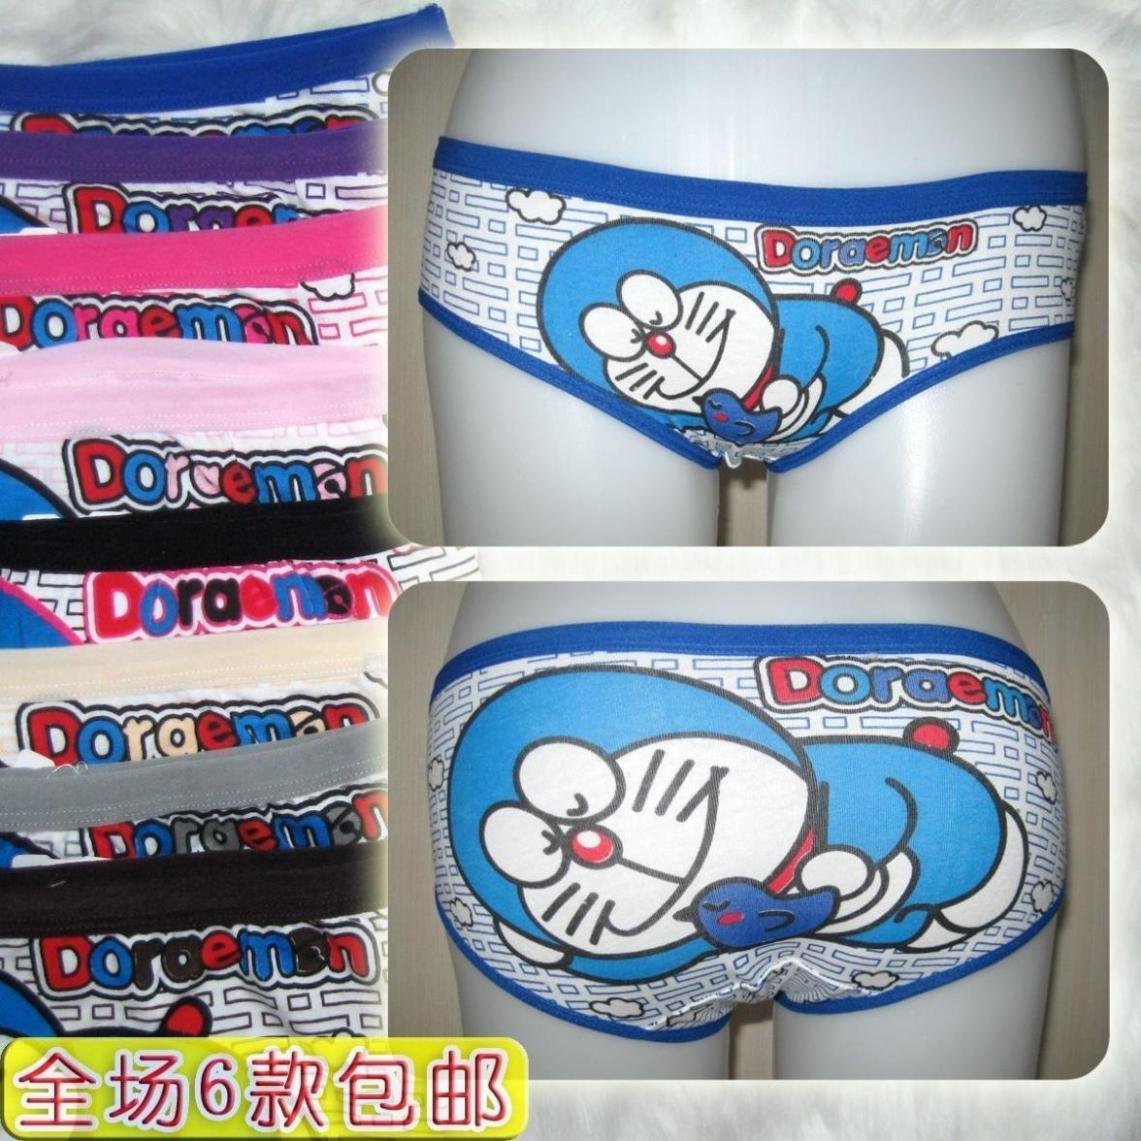 Ms # 9262 cotton underwear cartoon jingle more la a dream ladies sometimes called tighty whities they 8 color cotton